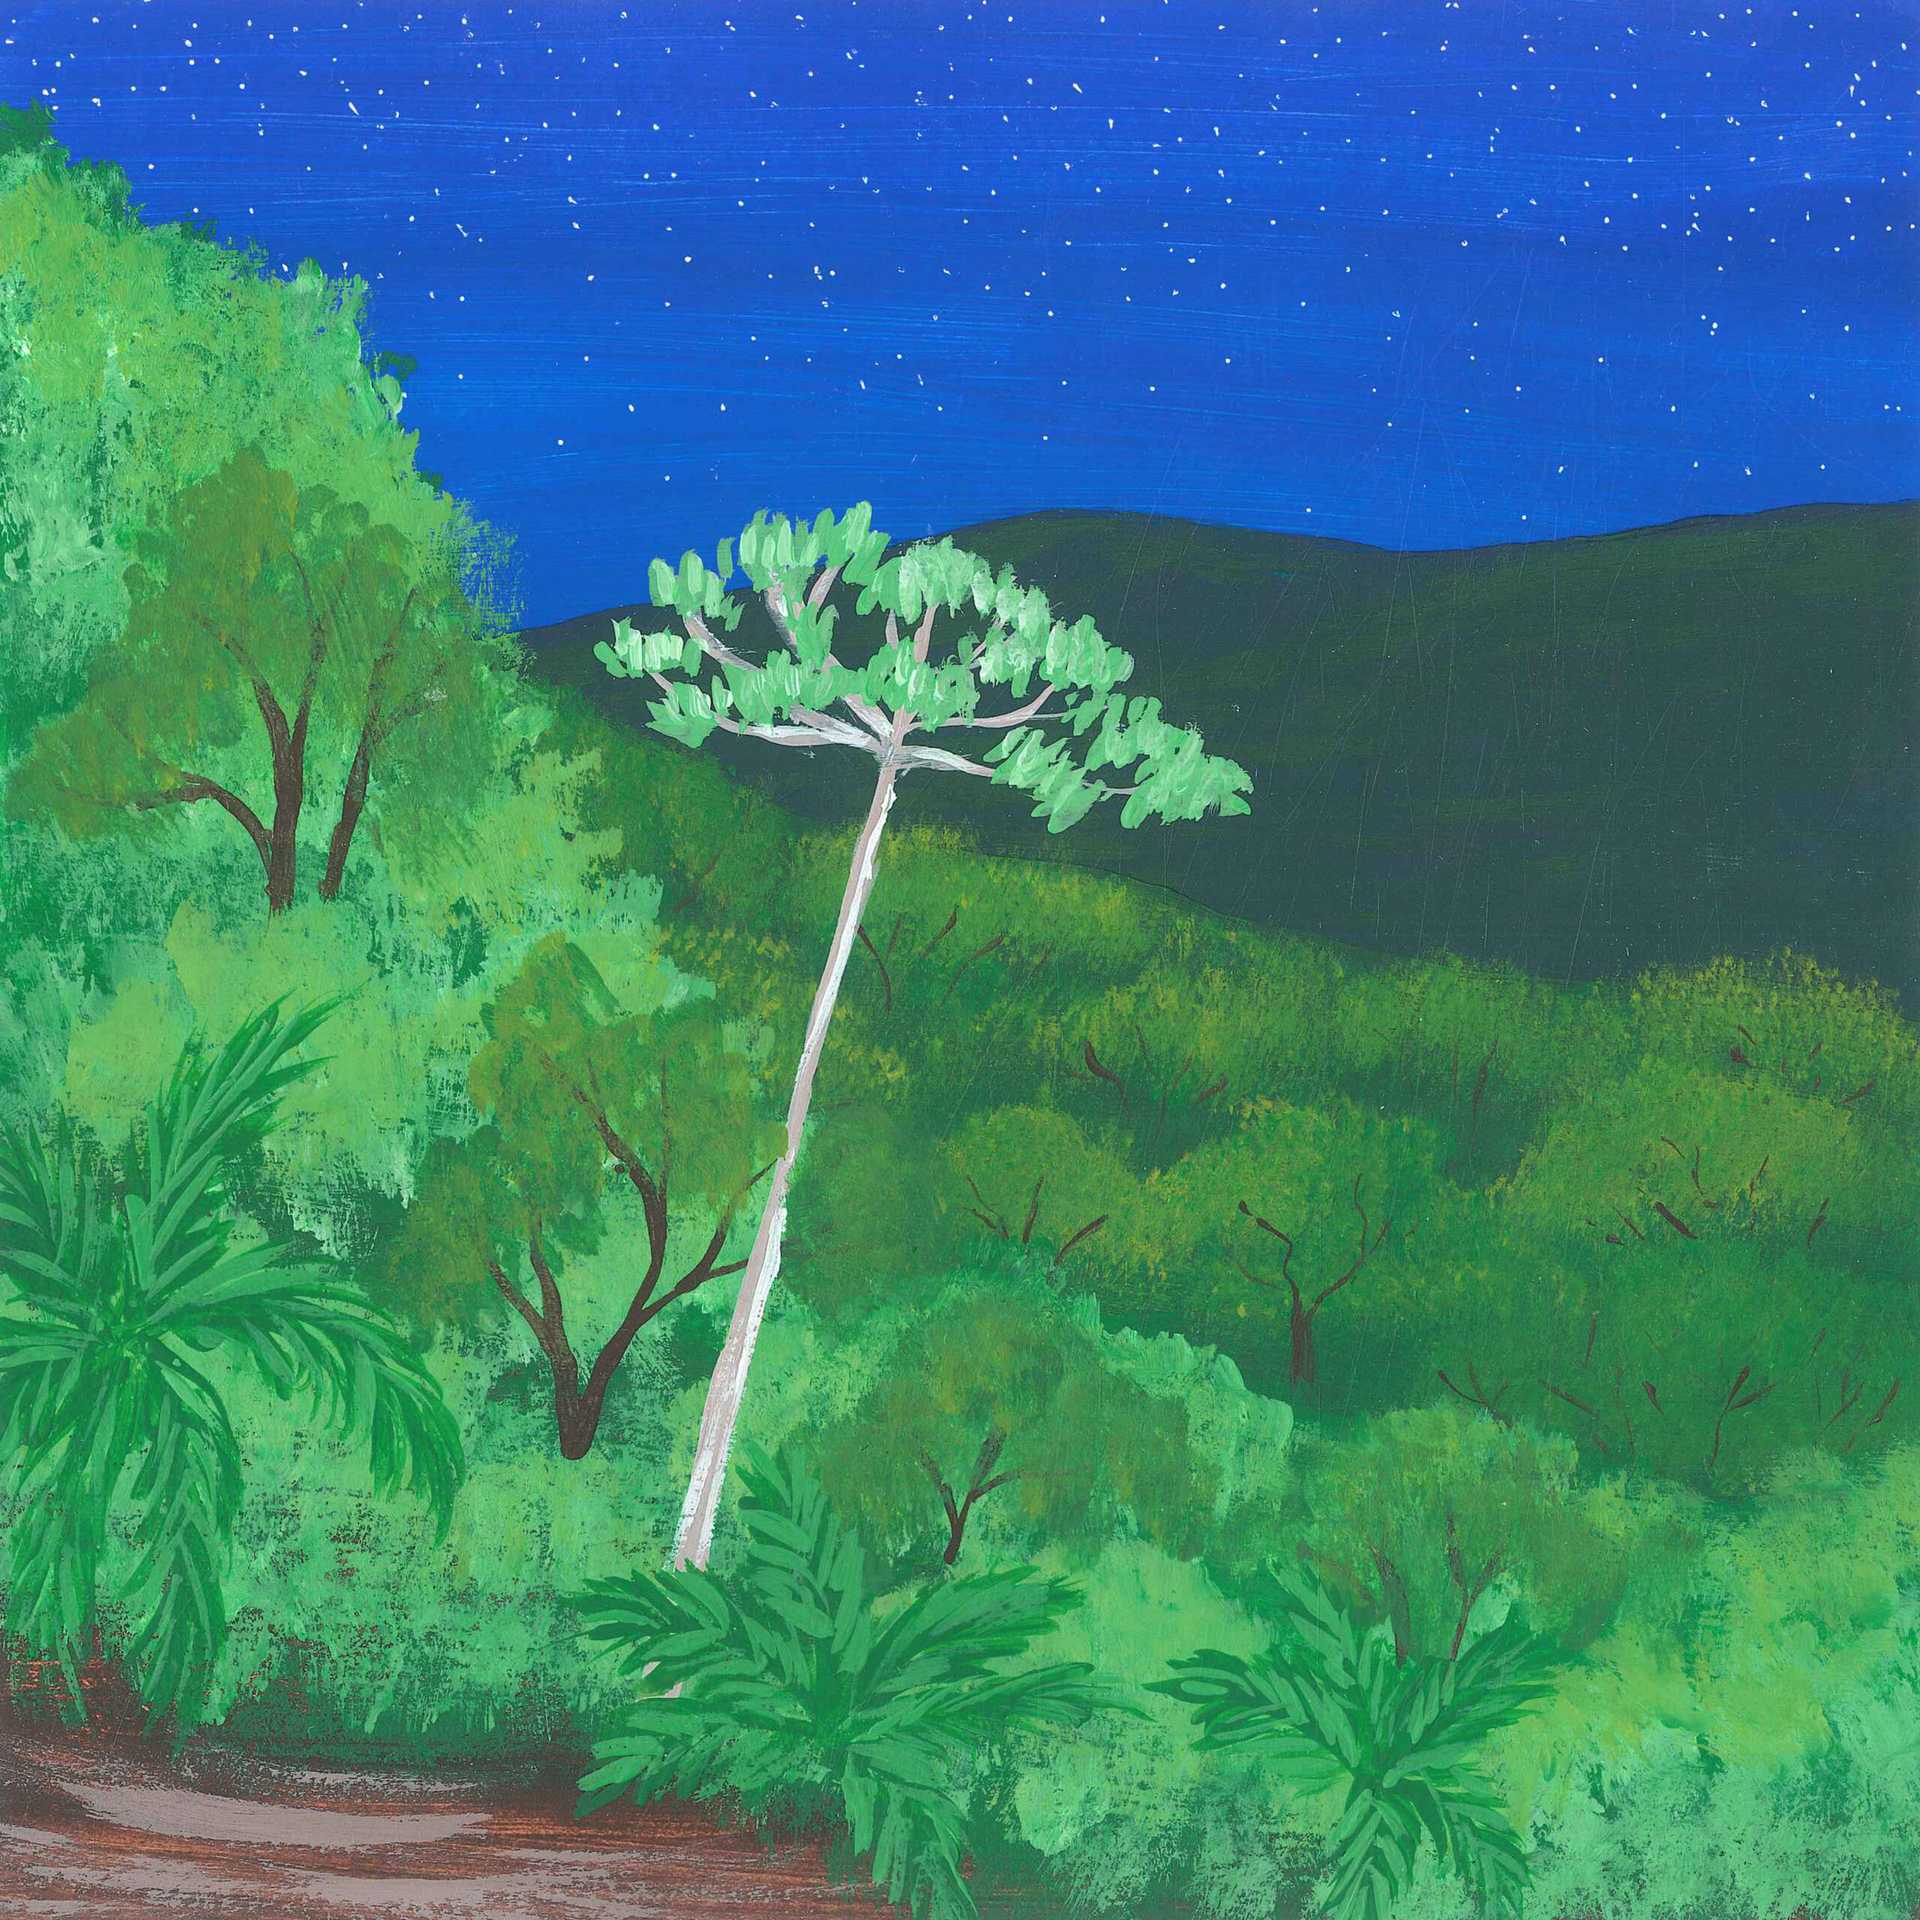 Relaxing Evening in the Amazonian Rainforest - nature landscape painting - earth.fm